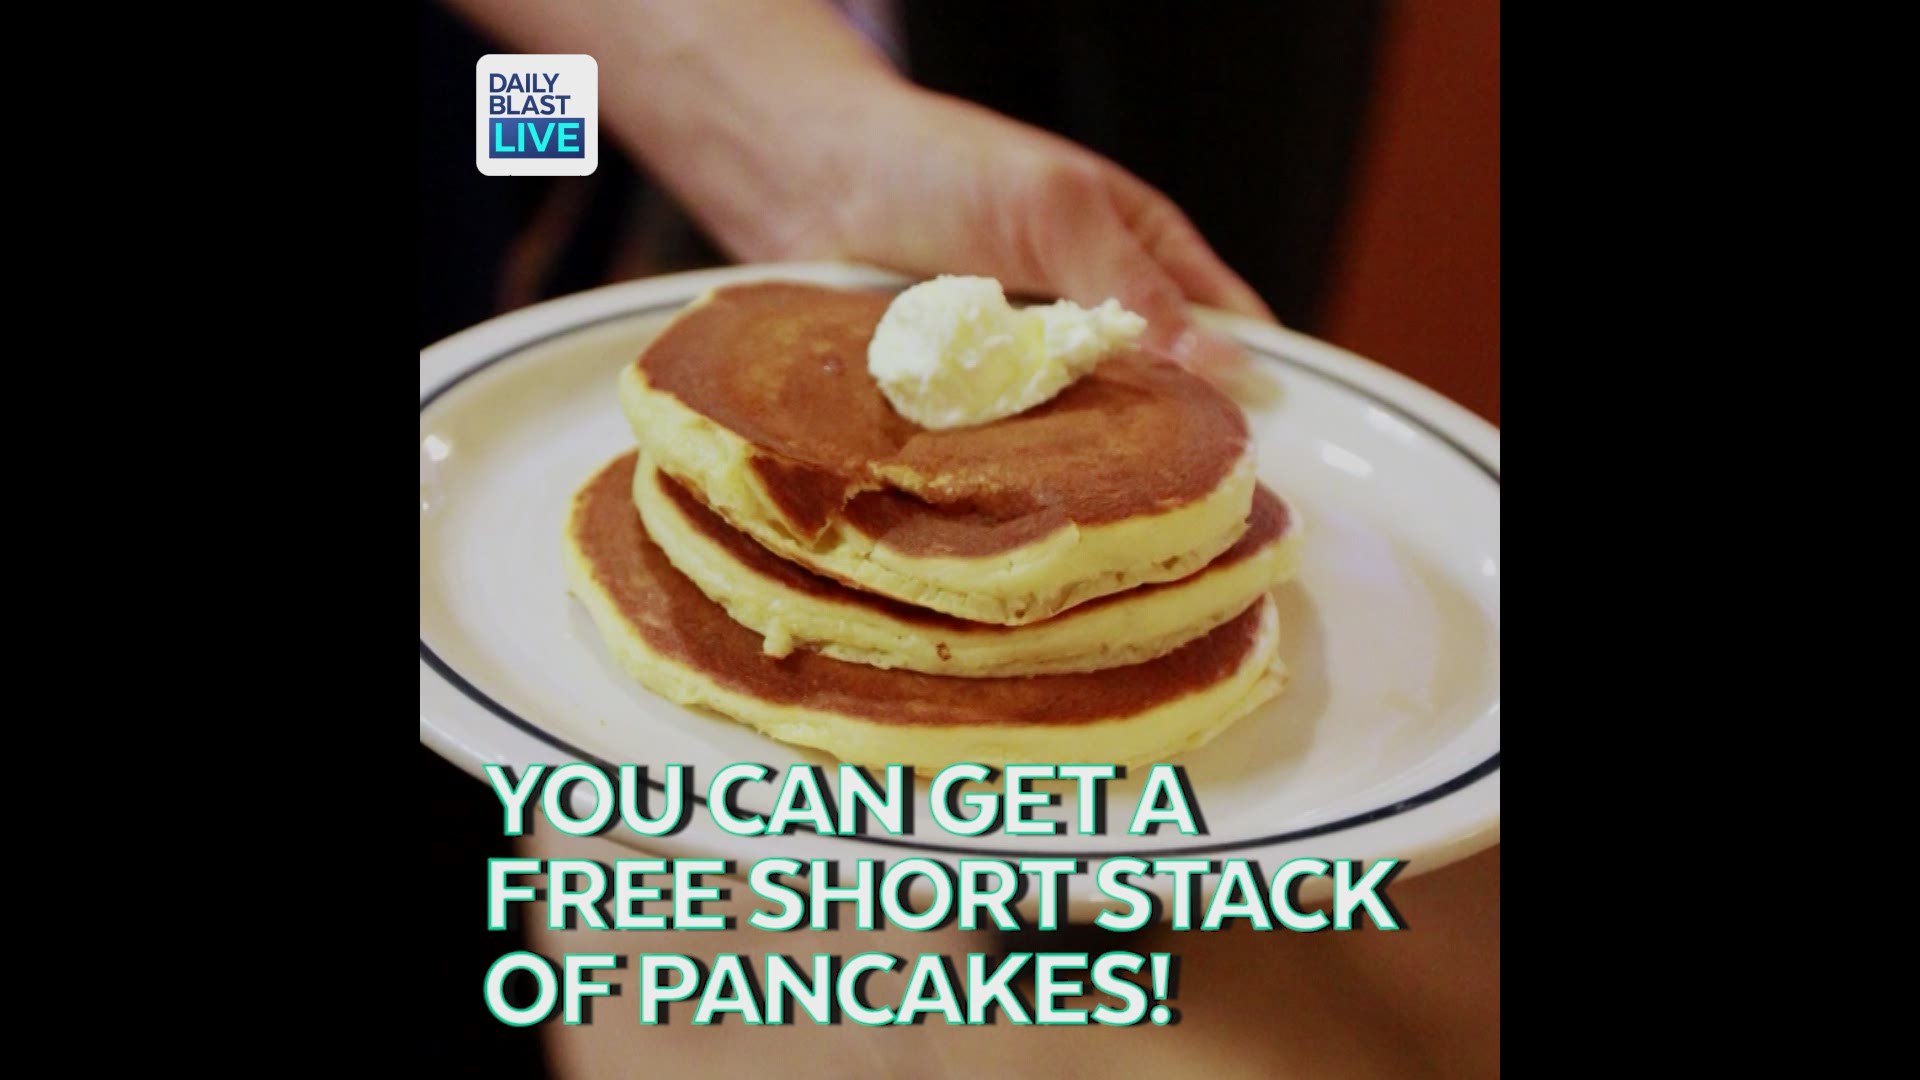 Tuesday, Feb. 27th is your day for free pancakes